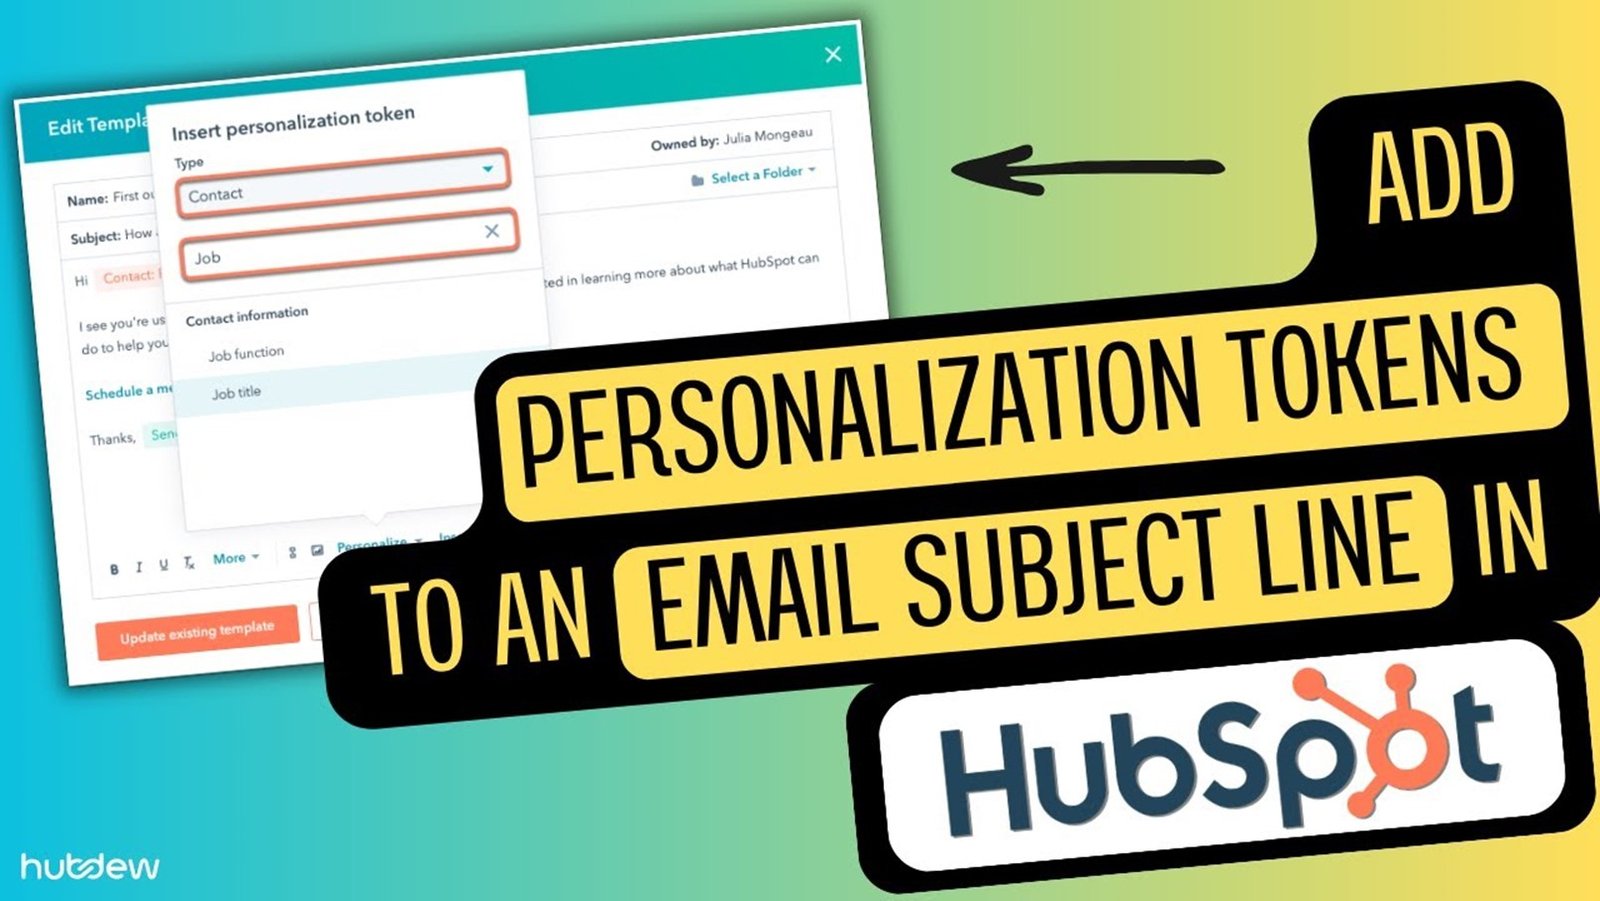 Hubspot Personalization and Targeting